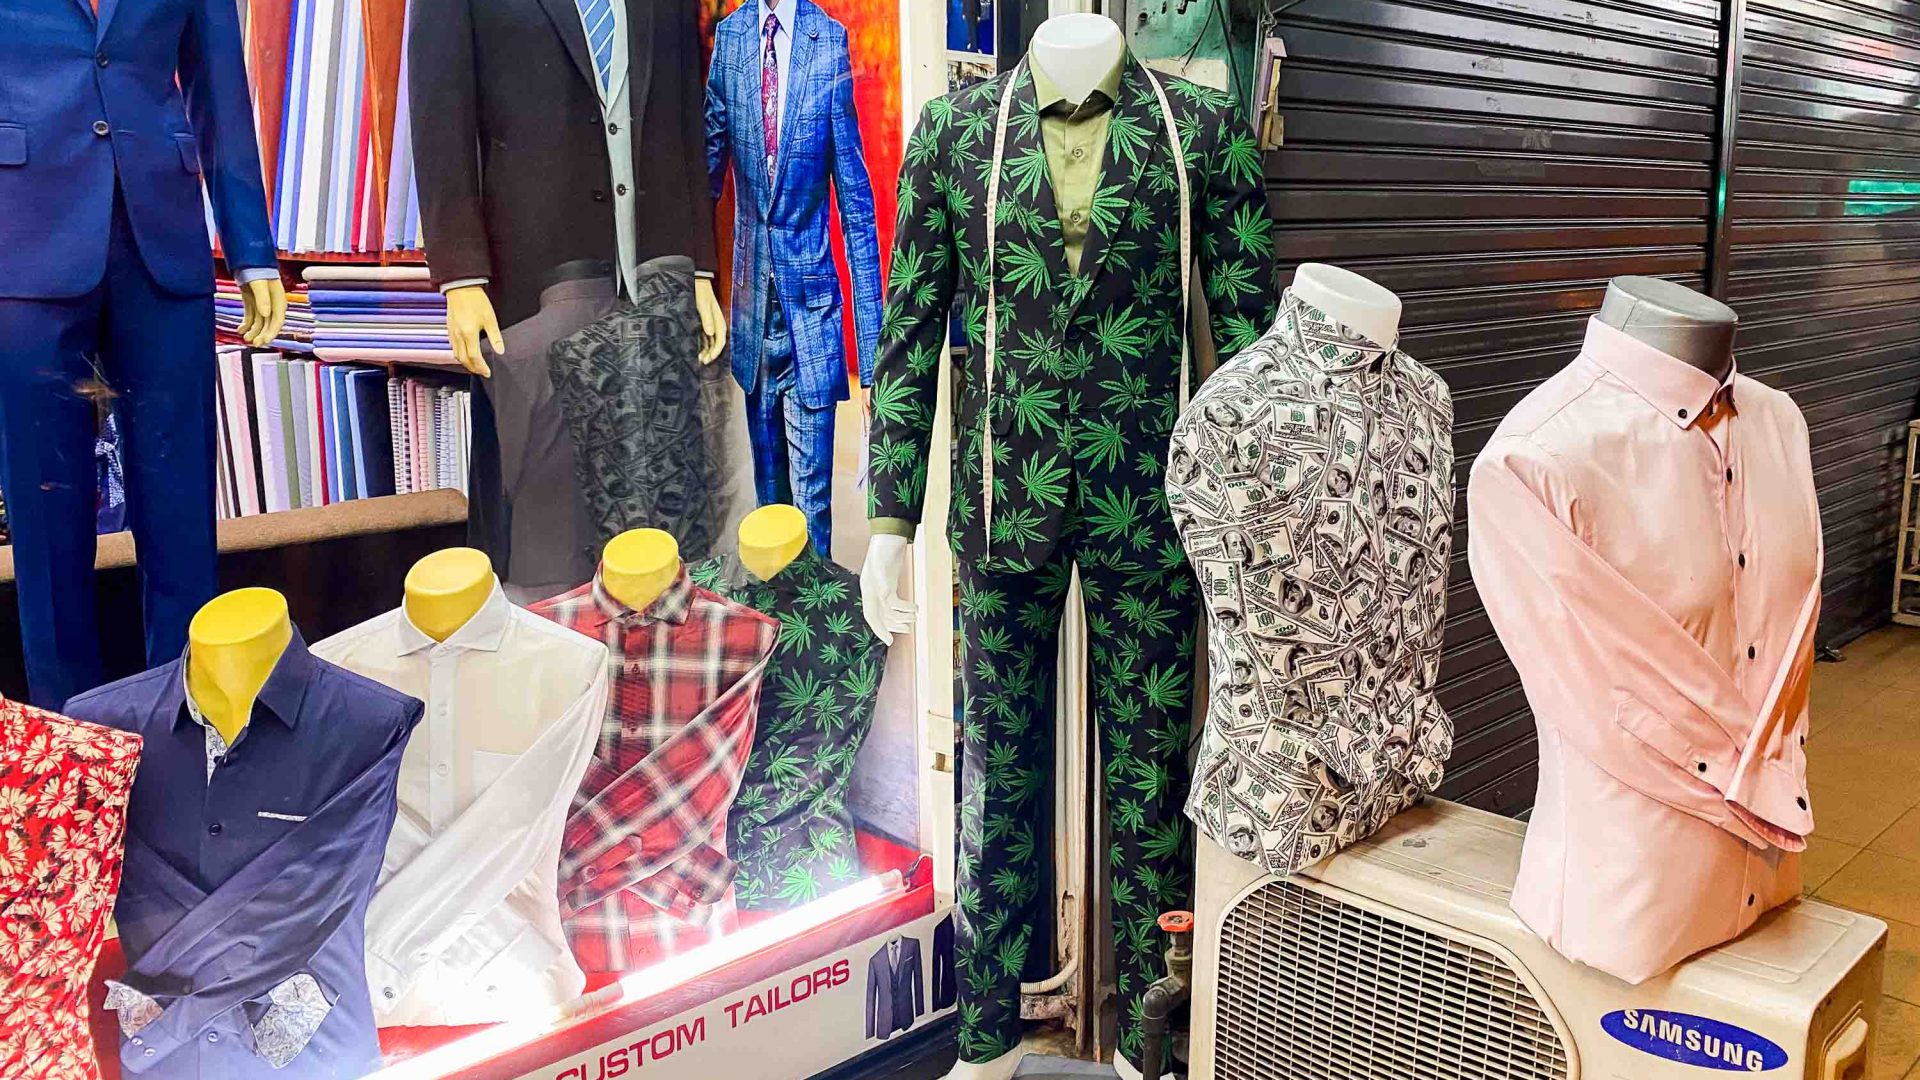 A suit with cannabis leaves printed on it os for sale amongst other clothes outside of a shop in Thailand.